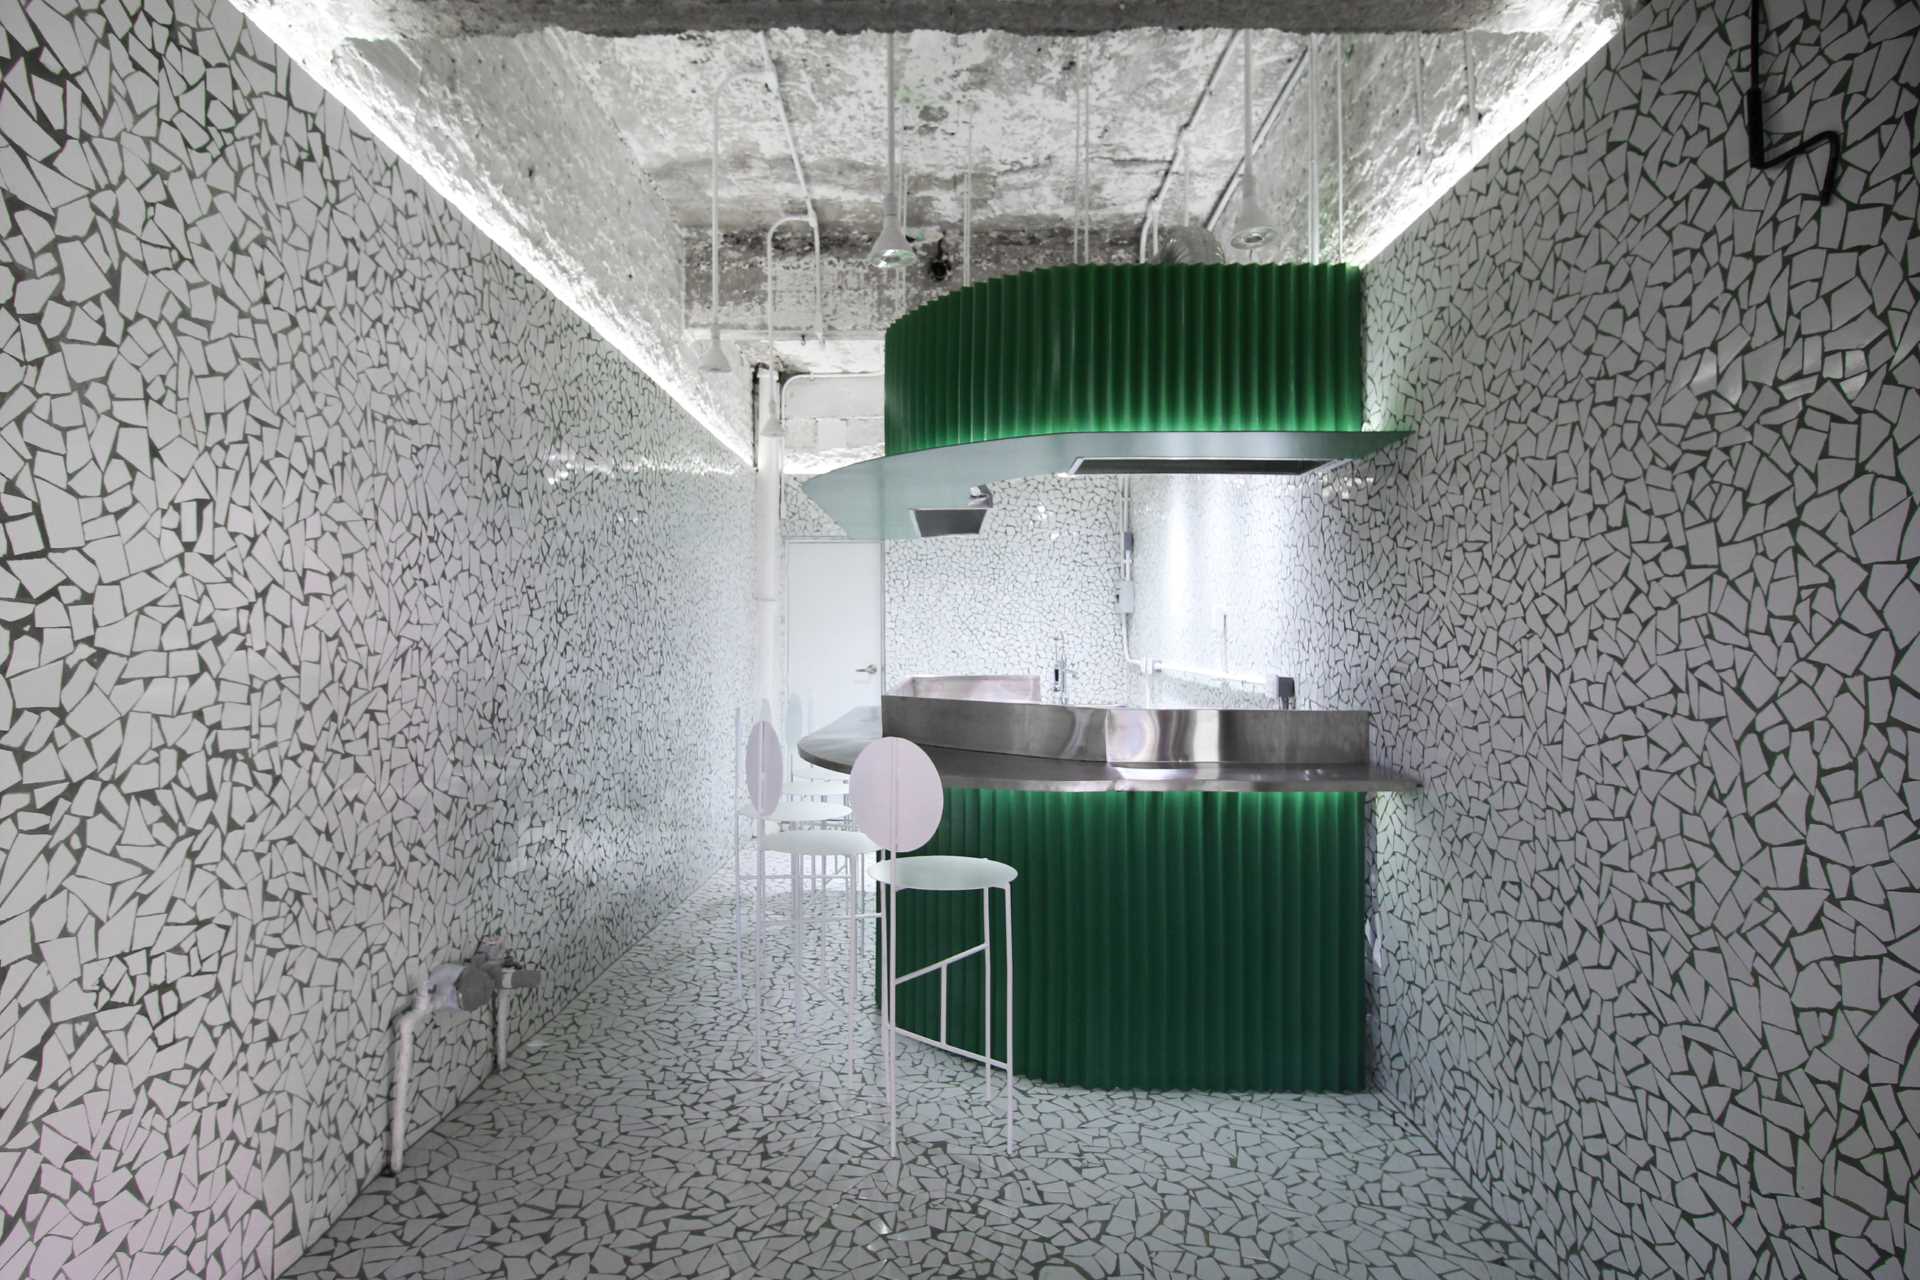 The small taco shop, which measures 170 sqft (15 sqm), has a striking appearance, with the walls and floor covered in a broken tile mosaic.